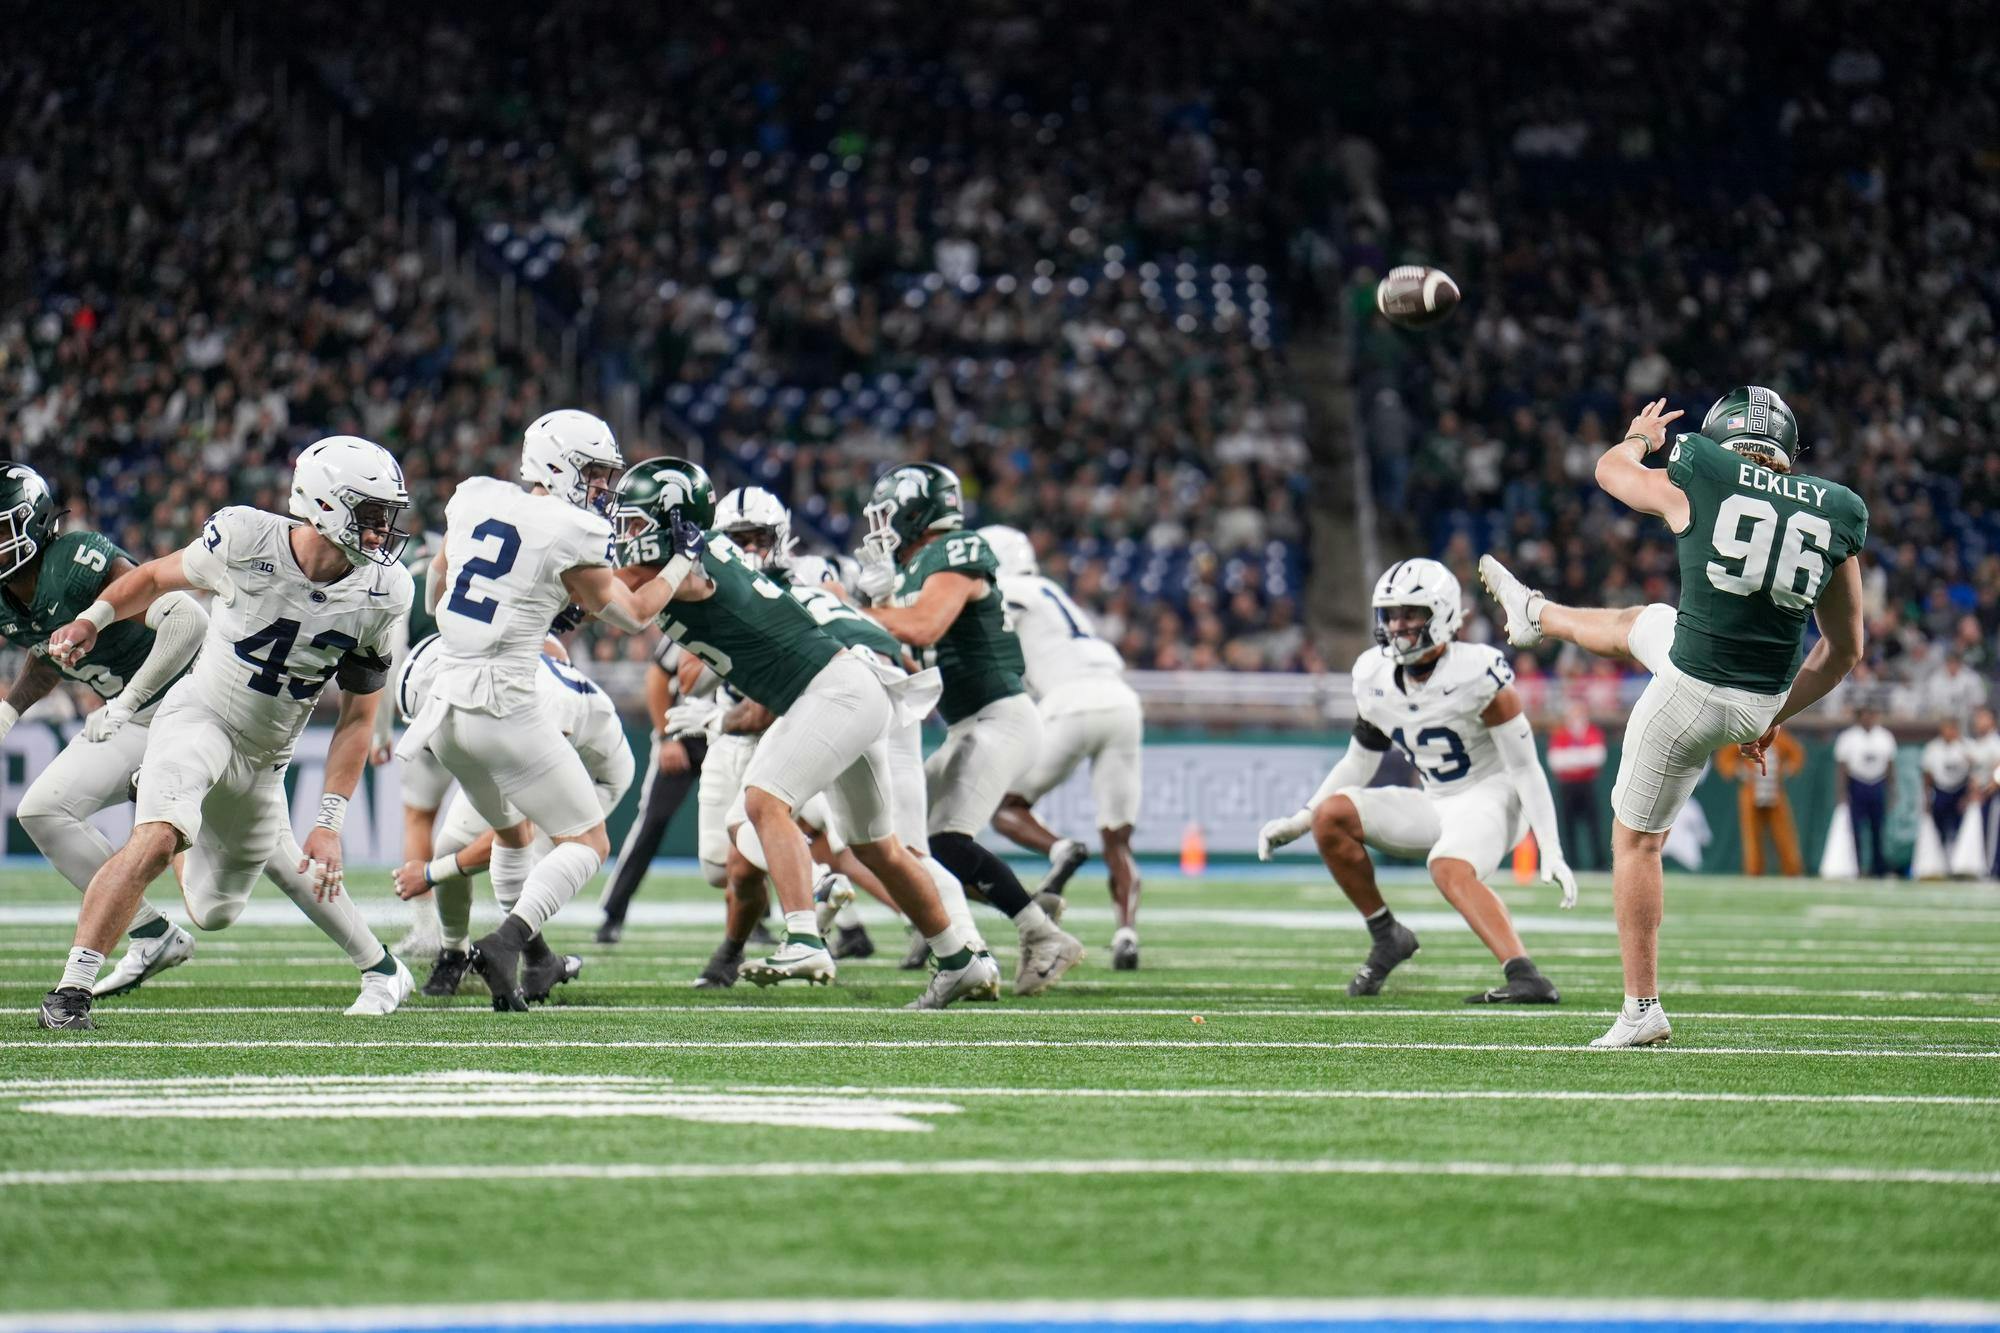 <p>Redshirt freshman penalty kicker Ryan Eckley (96) punting the ball during a game against Penn State at Ford Field on Nov. 24, 2023.</p>